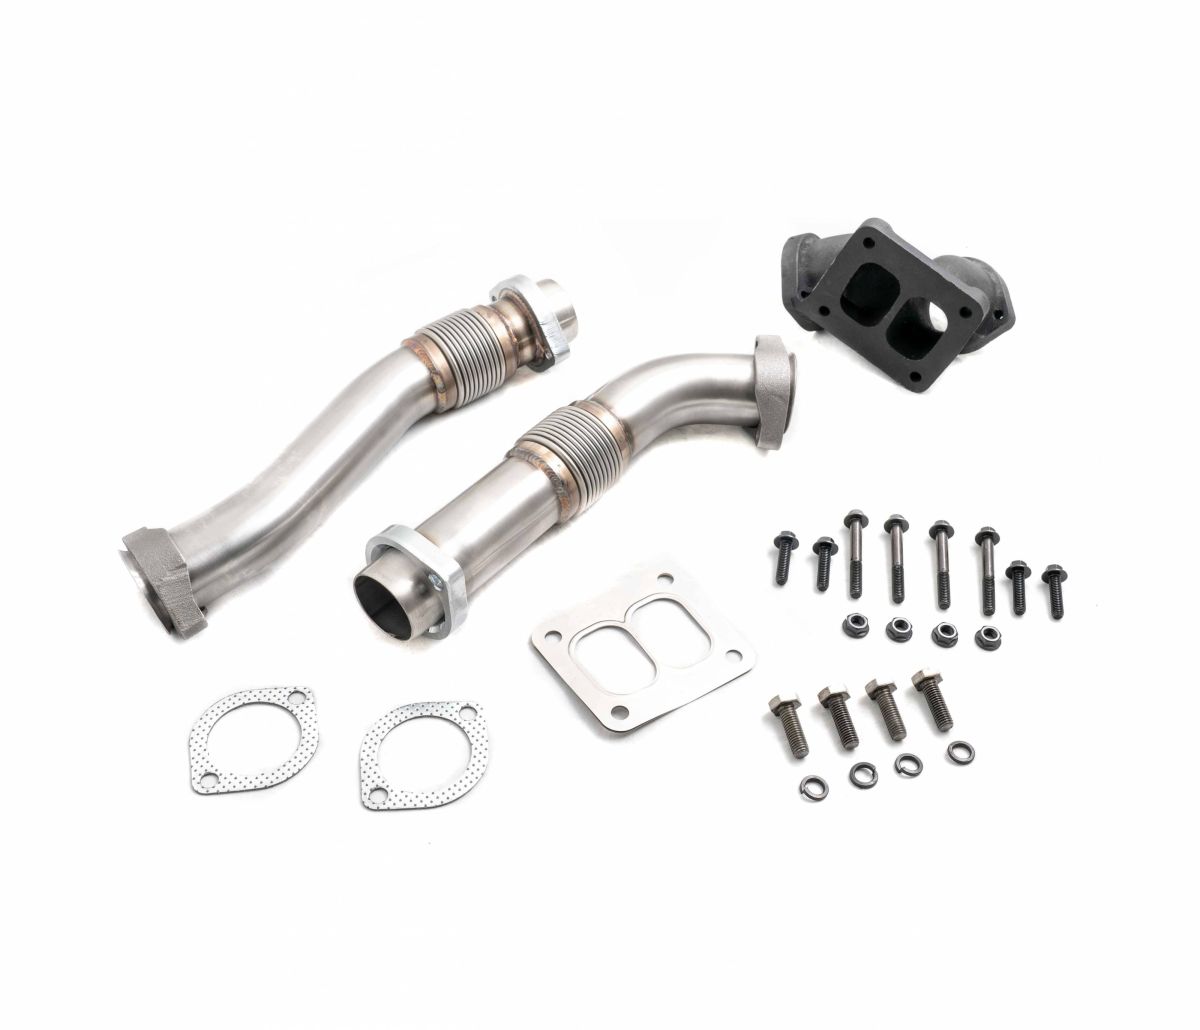 Rudy's Performance Parts - Heavy Duty Stainless Steel Bellowed Up Pipe Kit 94-97 OBS Ford 7.3L Powerstroke